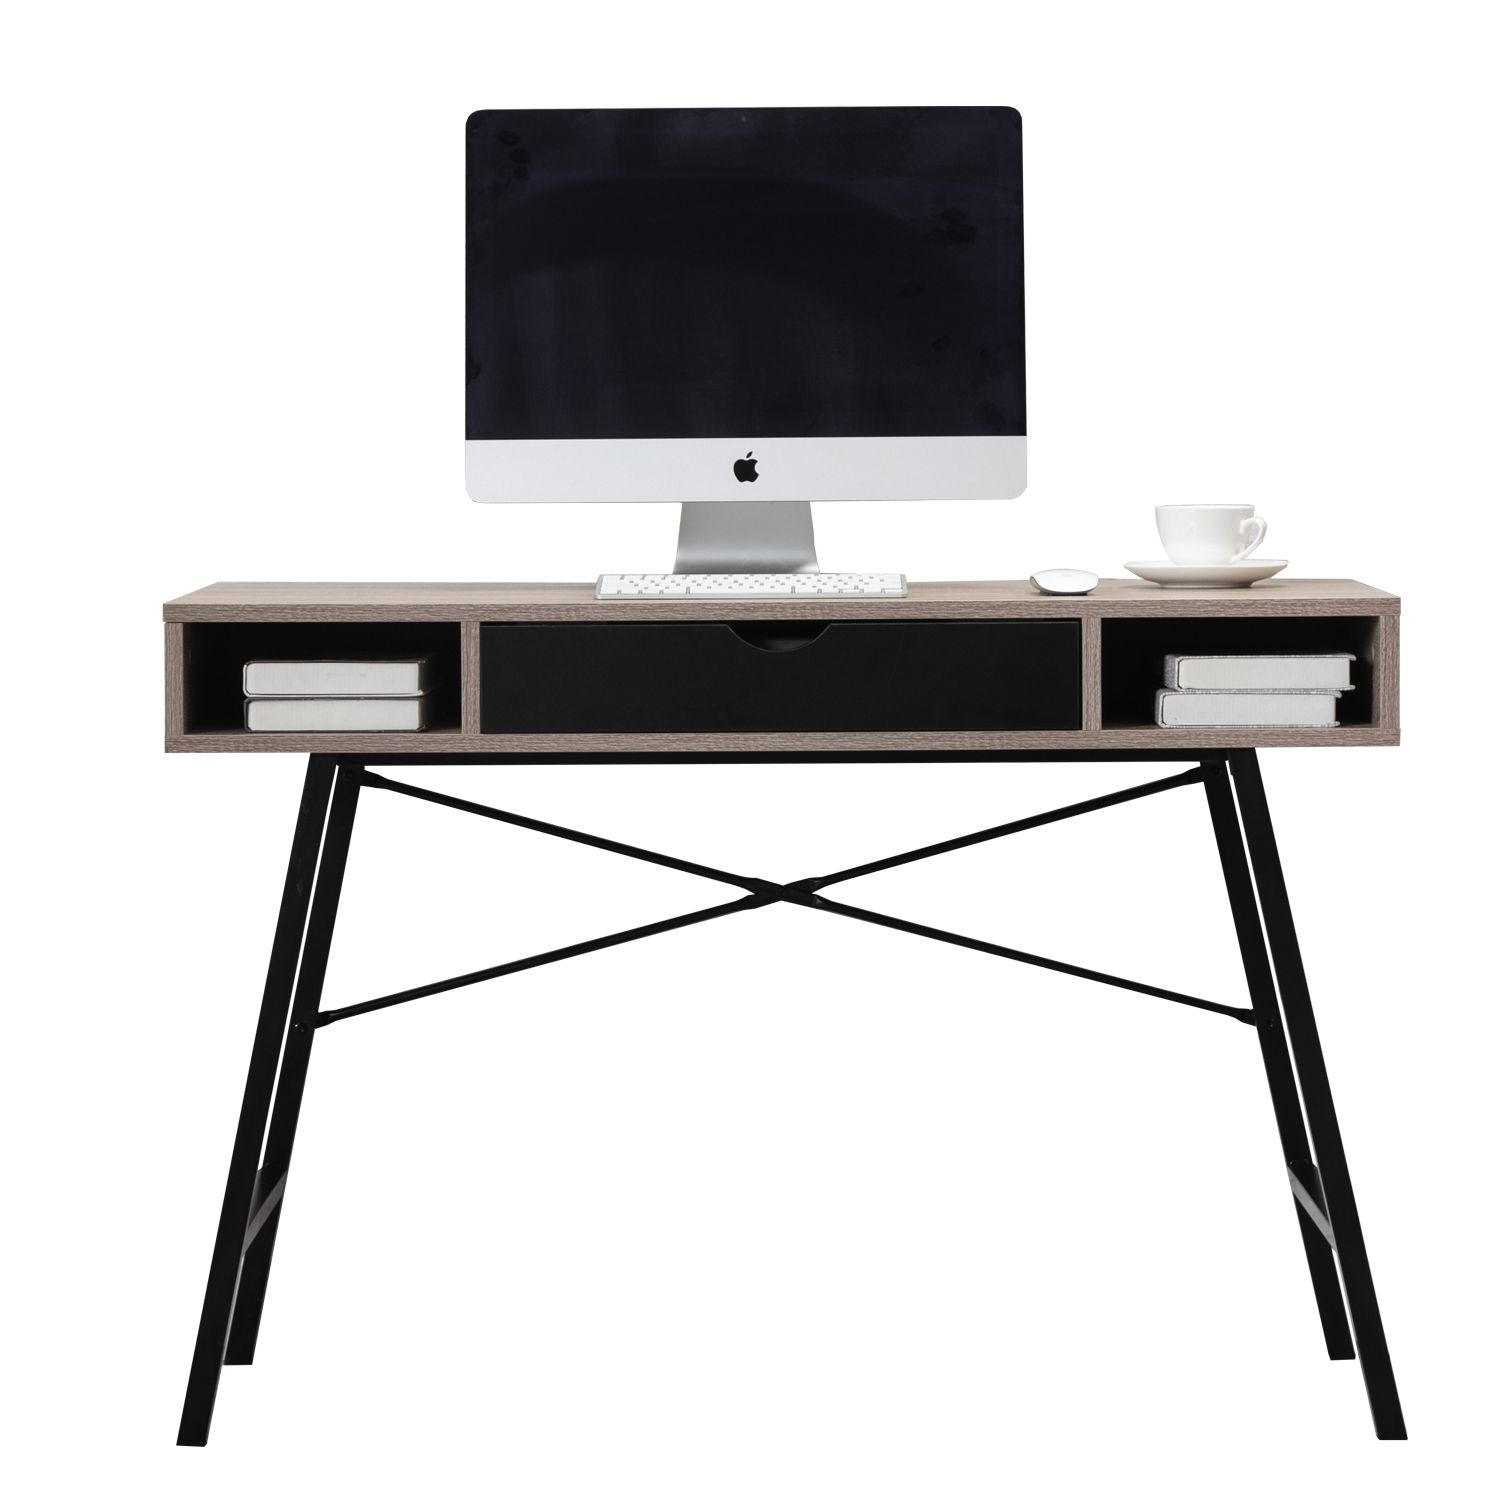 Computer Desk with Drawer, Home Office Table,Writing Study Table 43 inches, Walnut Black/White Drawer